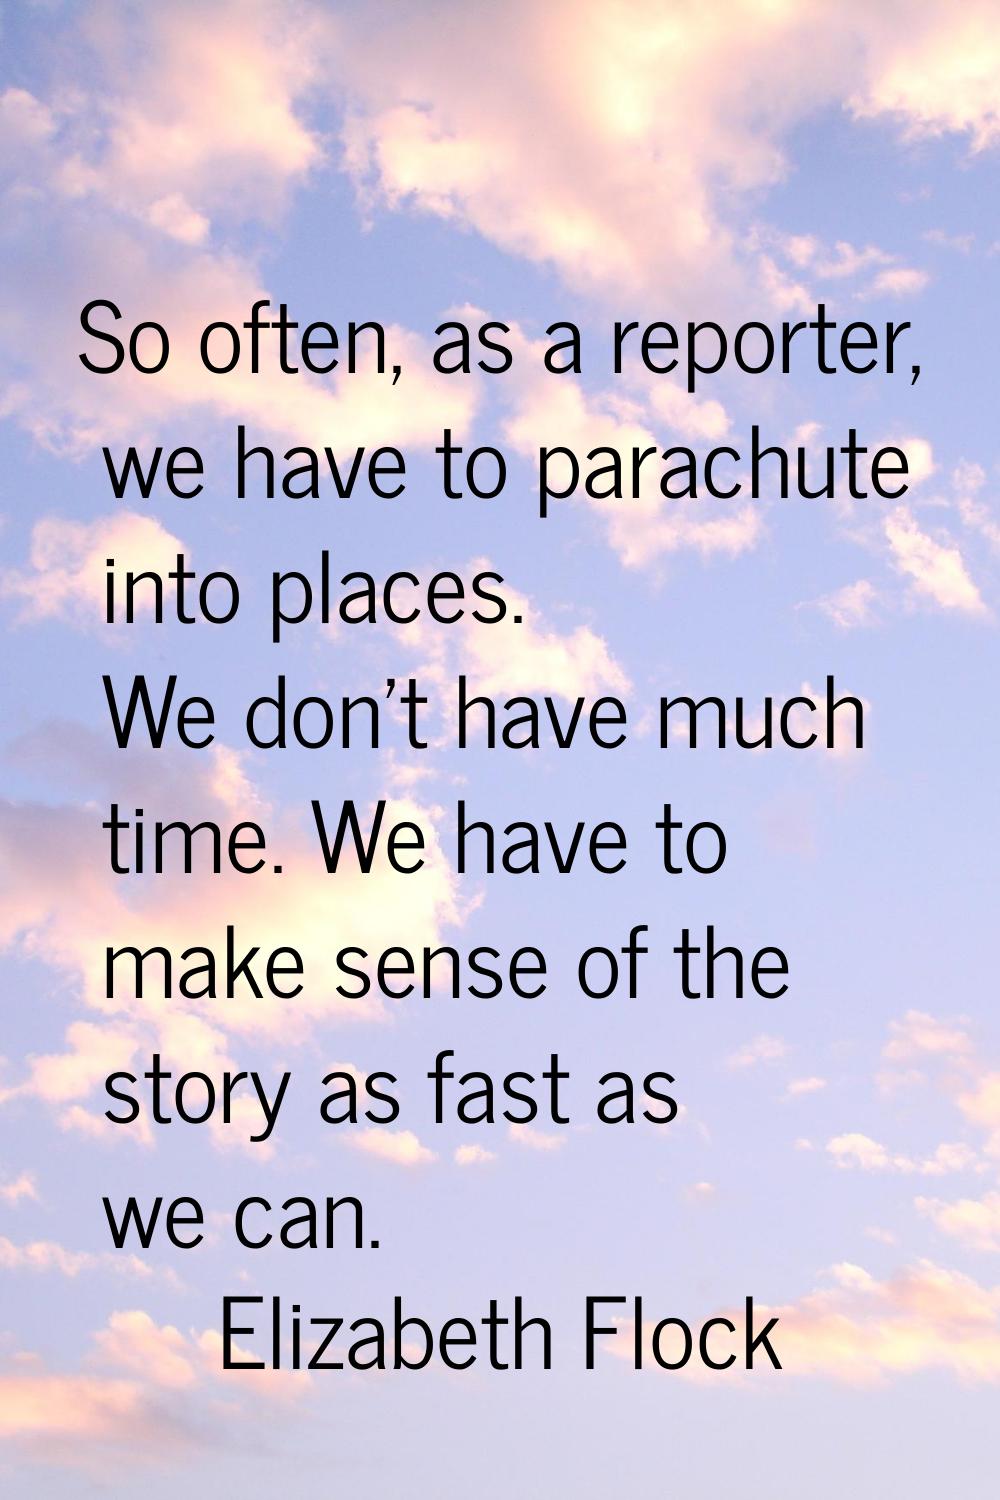 So often, as a reporter, we have to parachute into places. We don't have much time. We have to make